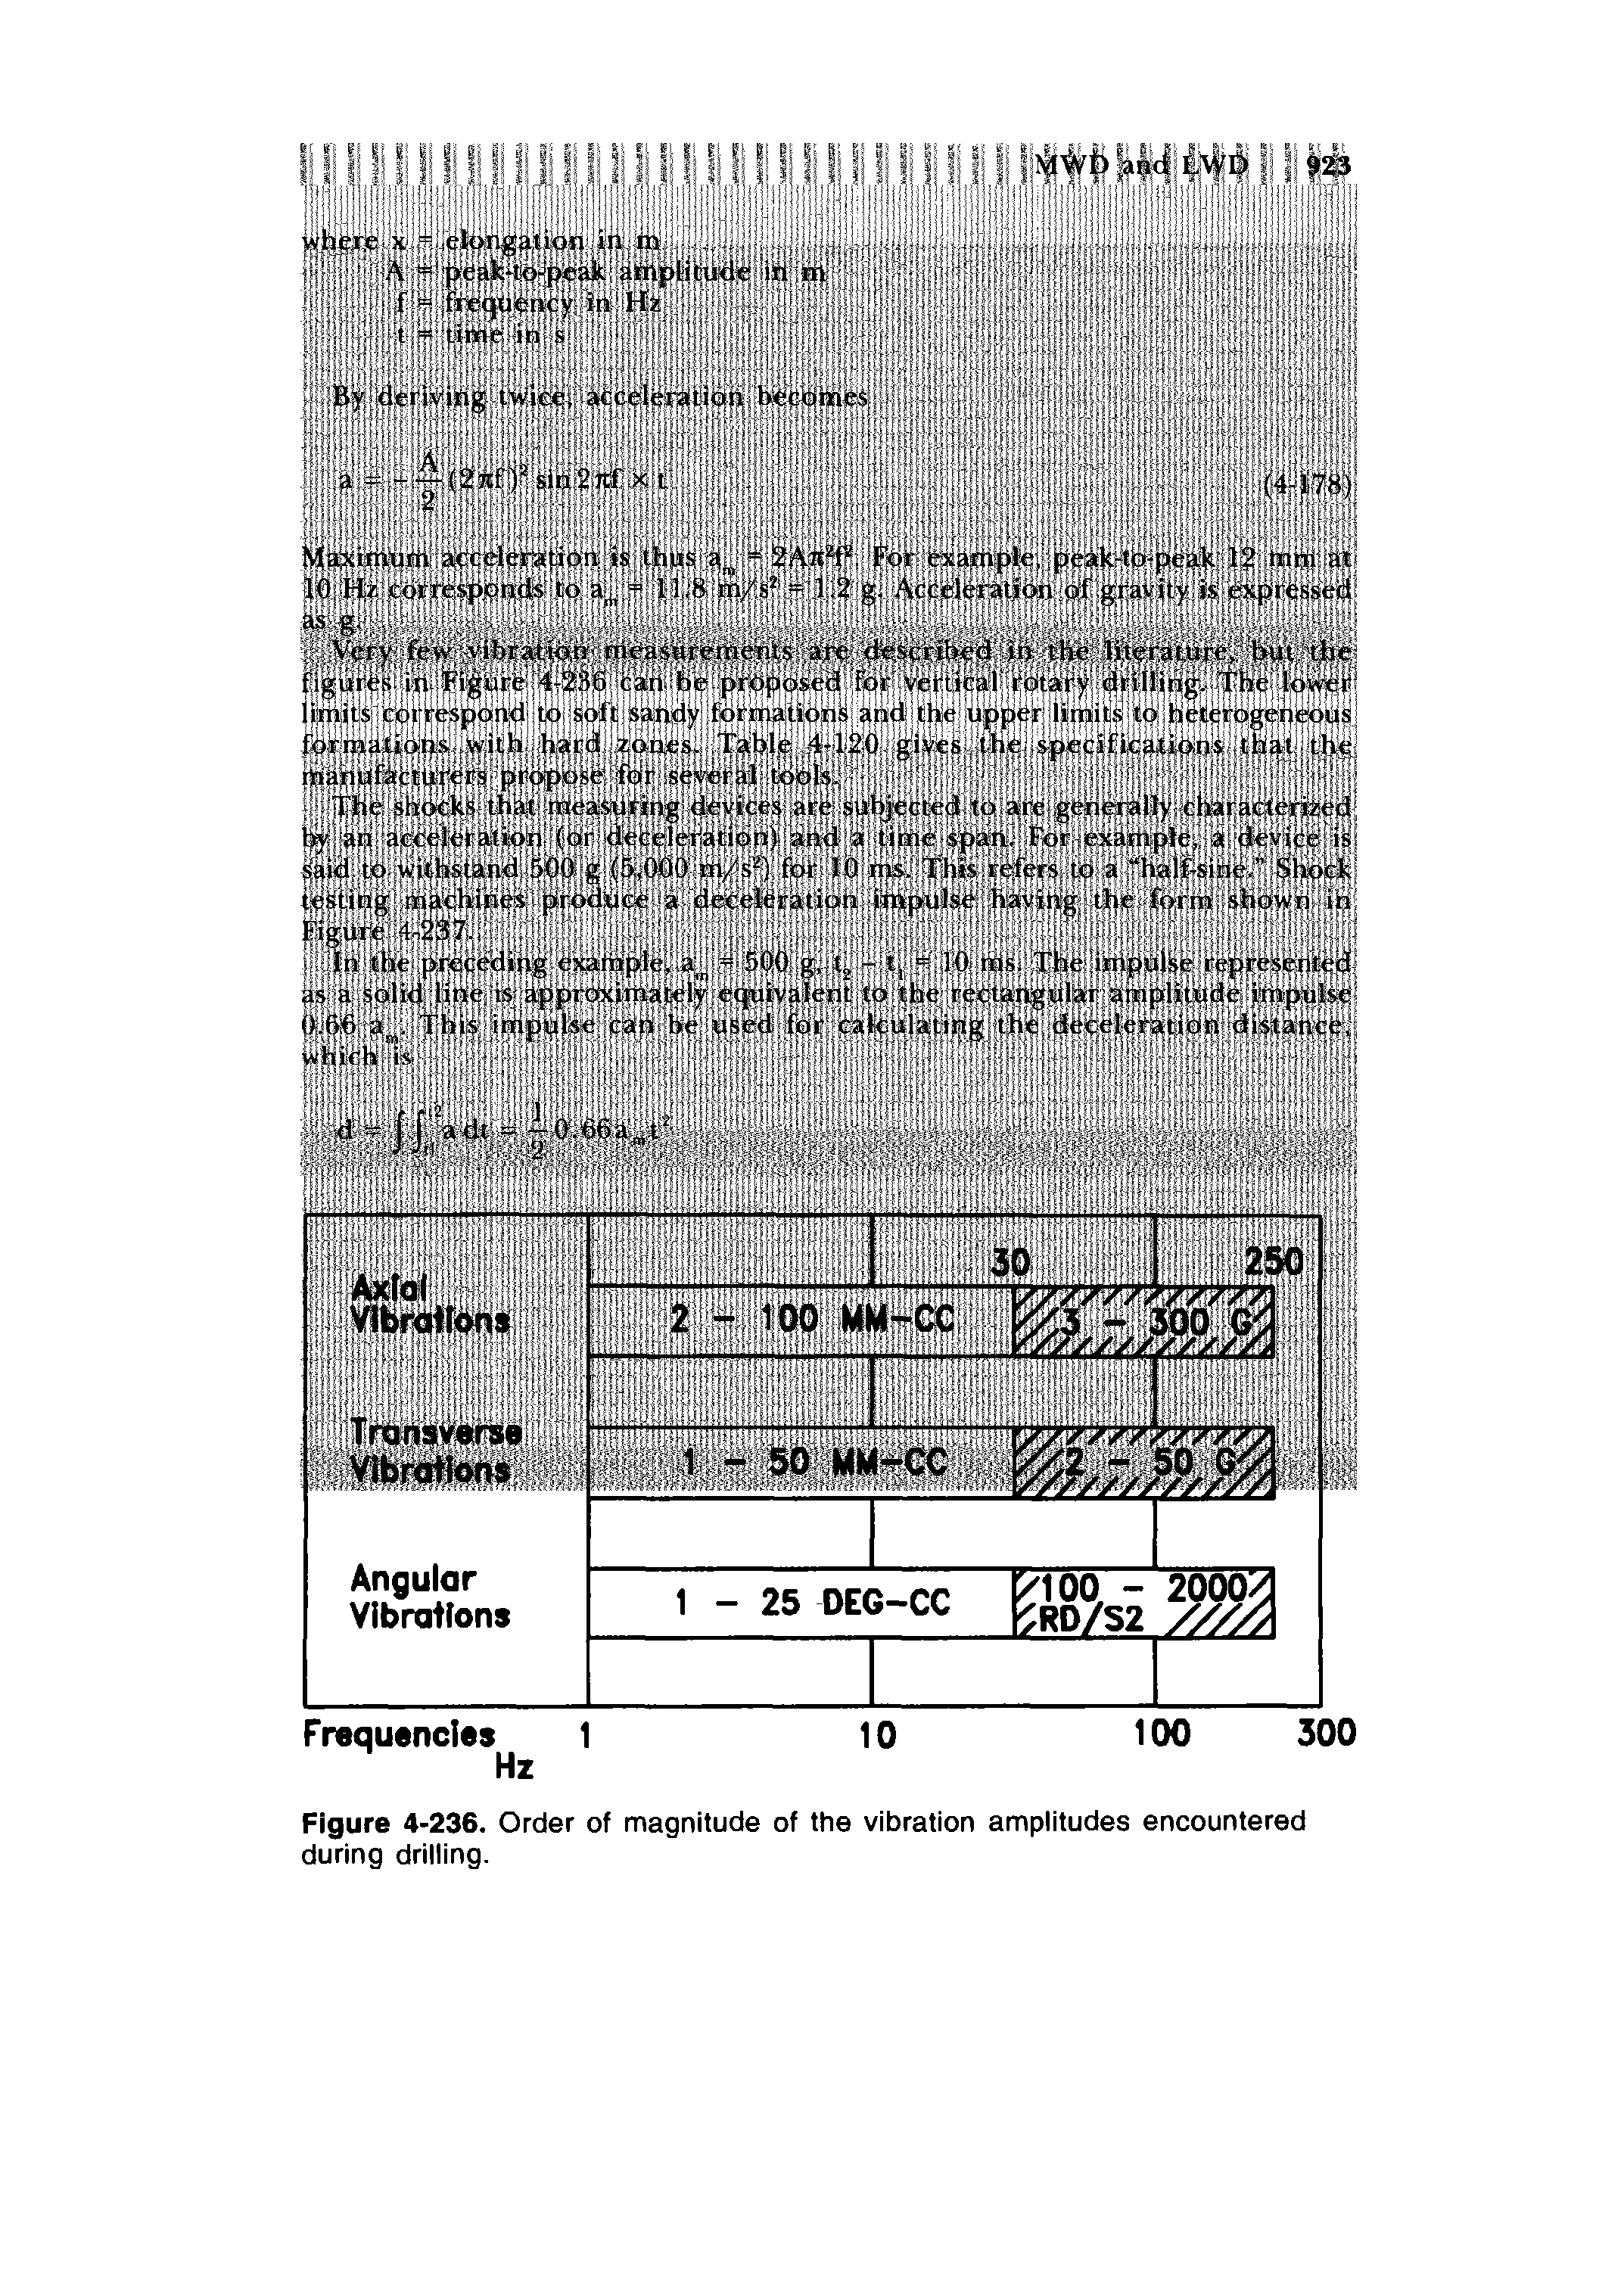 Figure 4-236. Order of magnitude of the vibration amplitudes encountered during drilling.